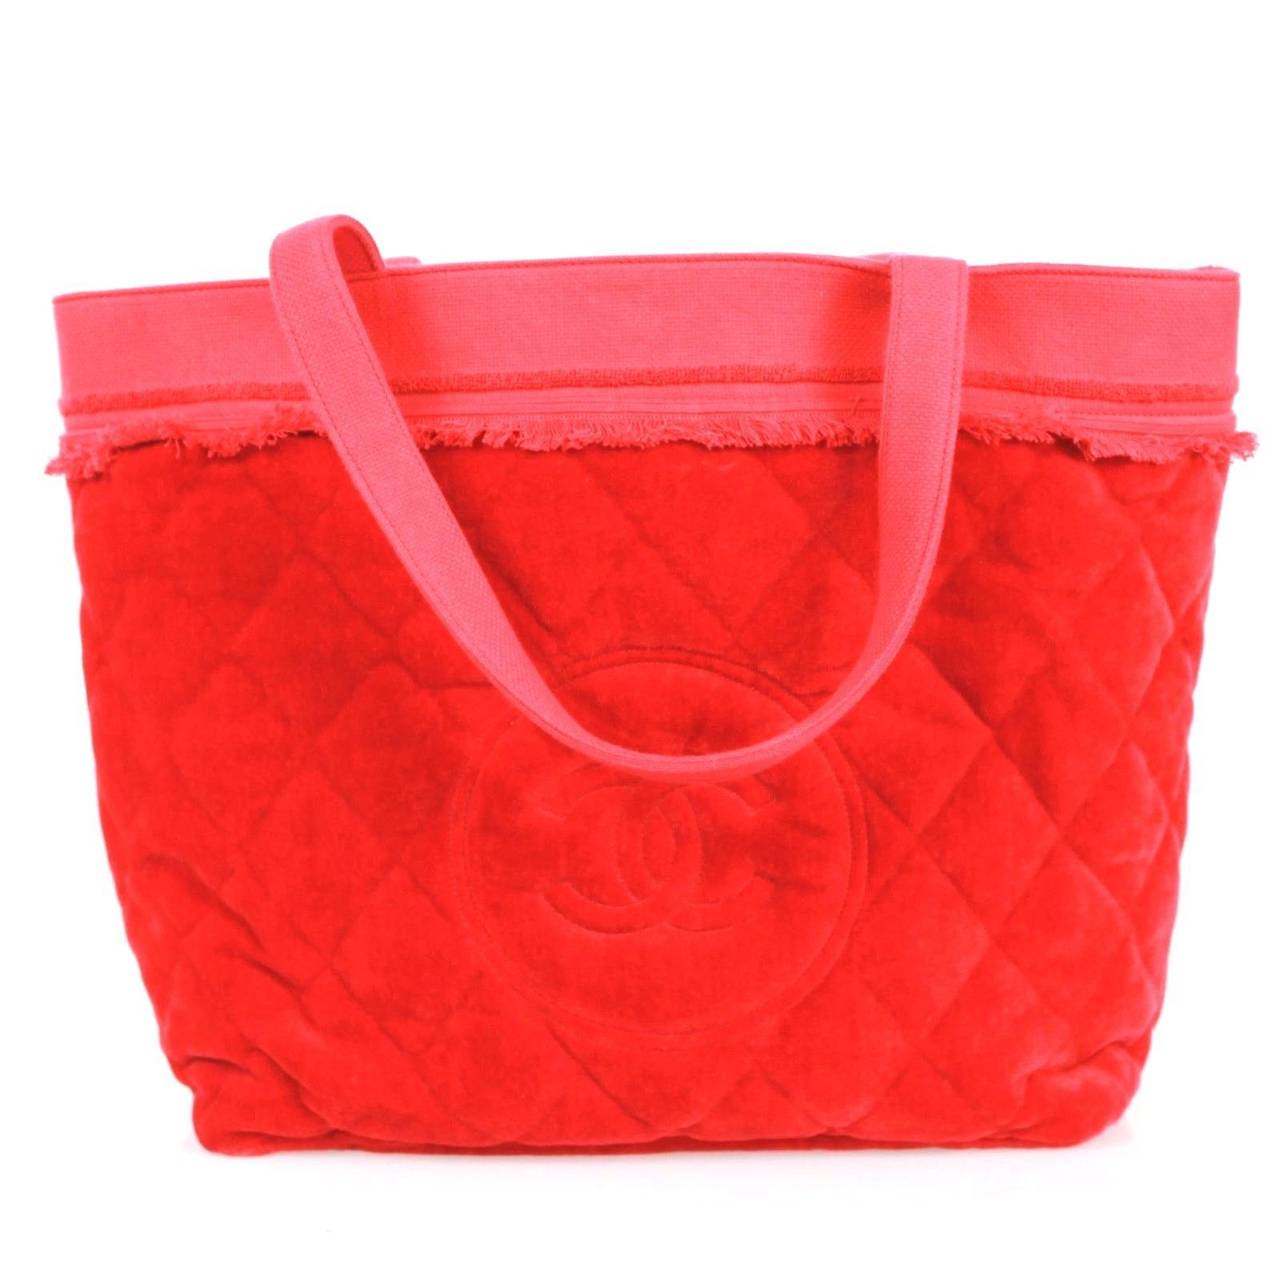 Chanel 2015 Cruise Line Beach Bag. Eye popping candy red bag in pure 100% cotton with a matching large towel to go with it. Perfect for the summer.

Conditions: Brand New

Includes: Towel and Dust Bag

14